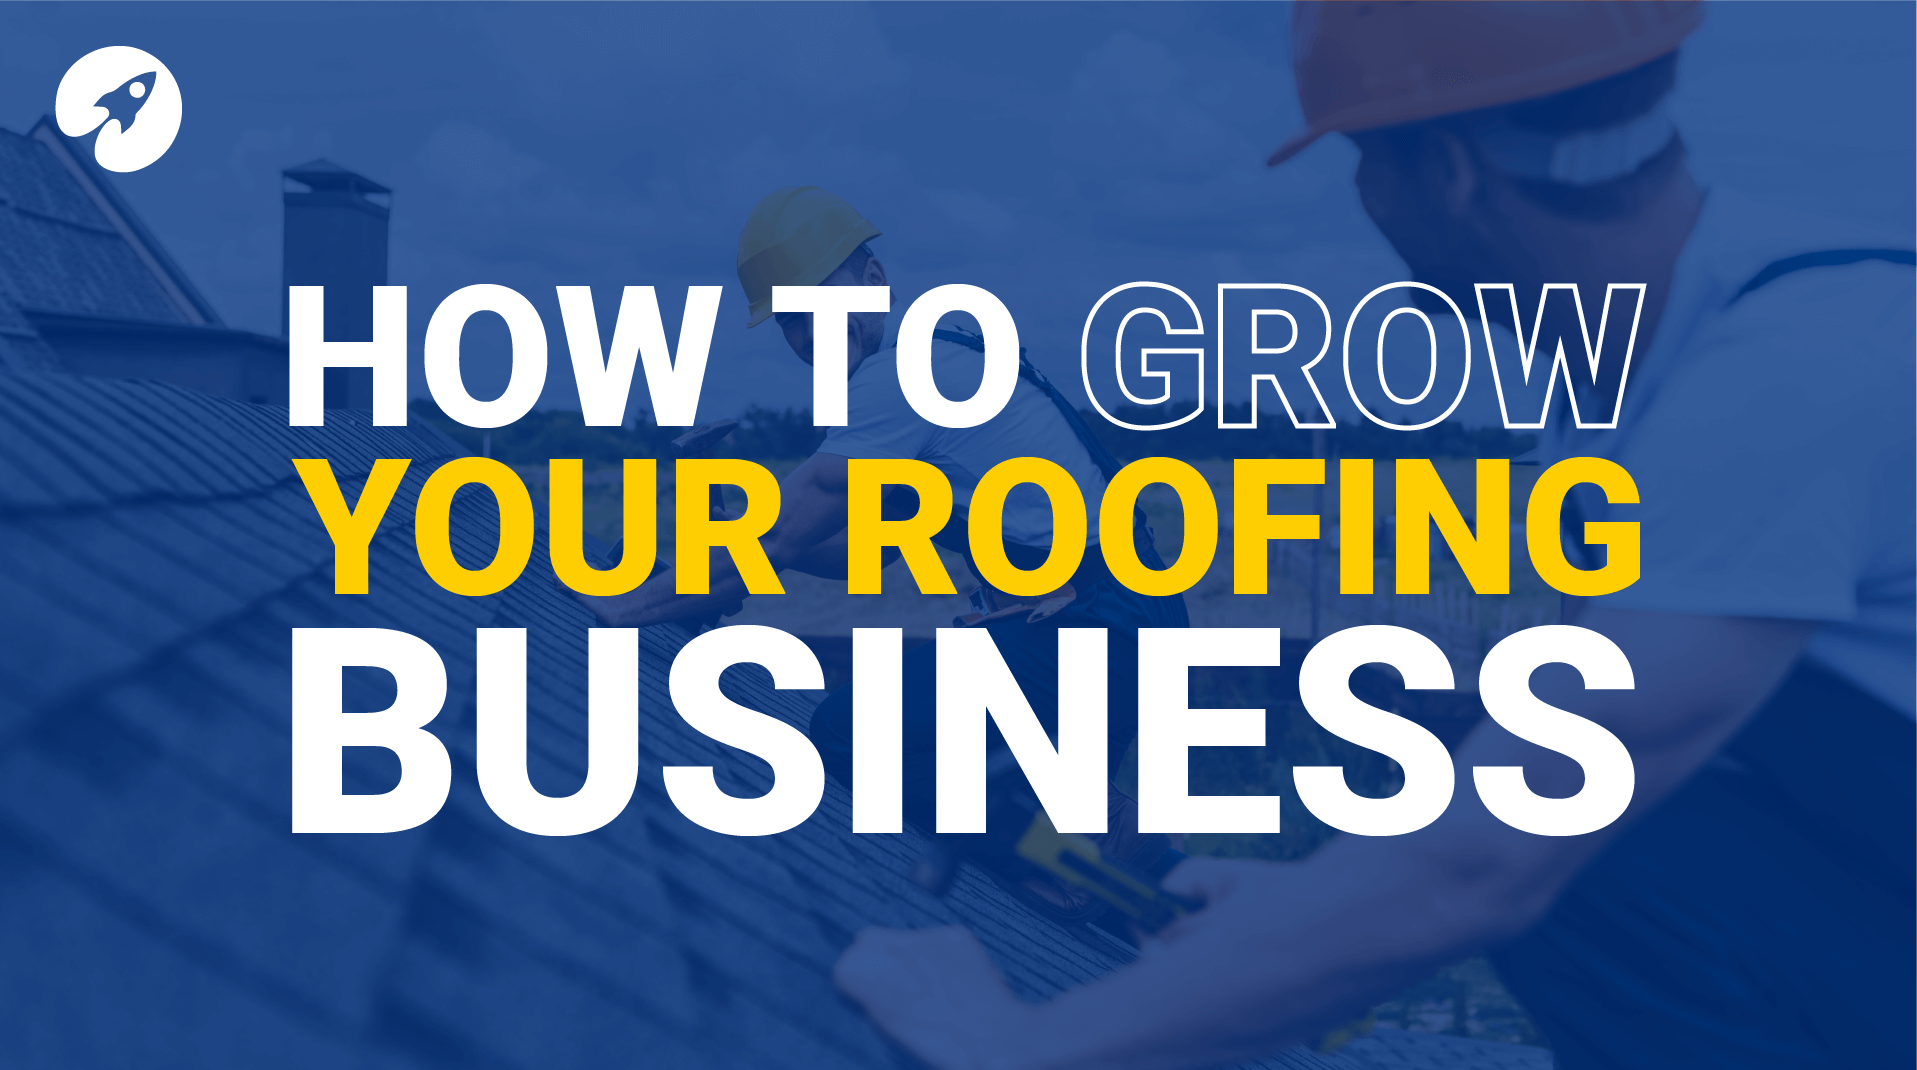 How to grow a roofing business